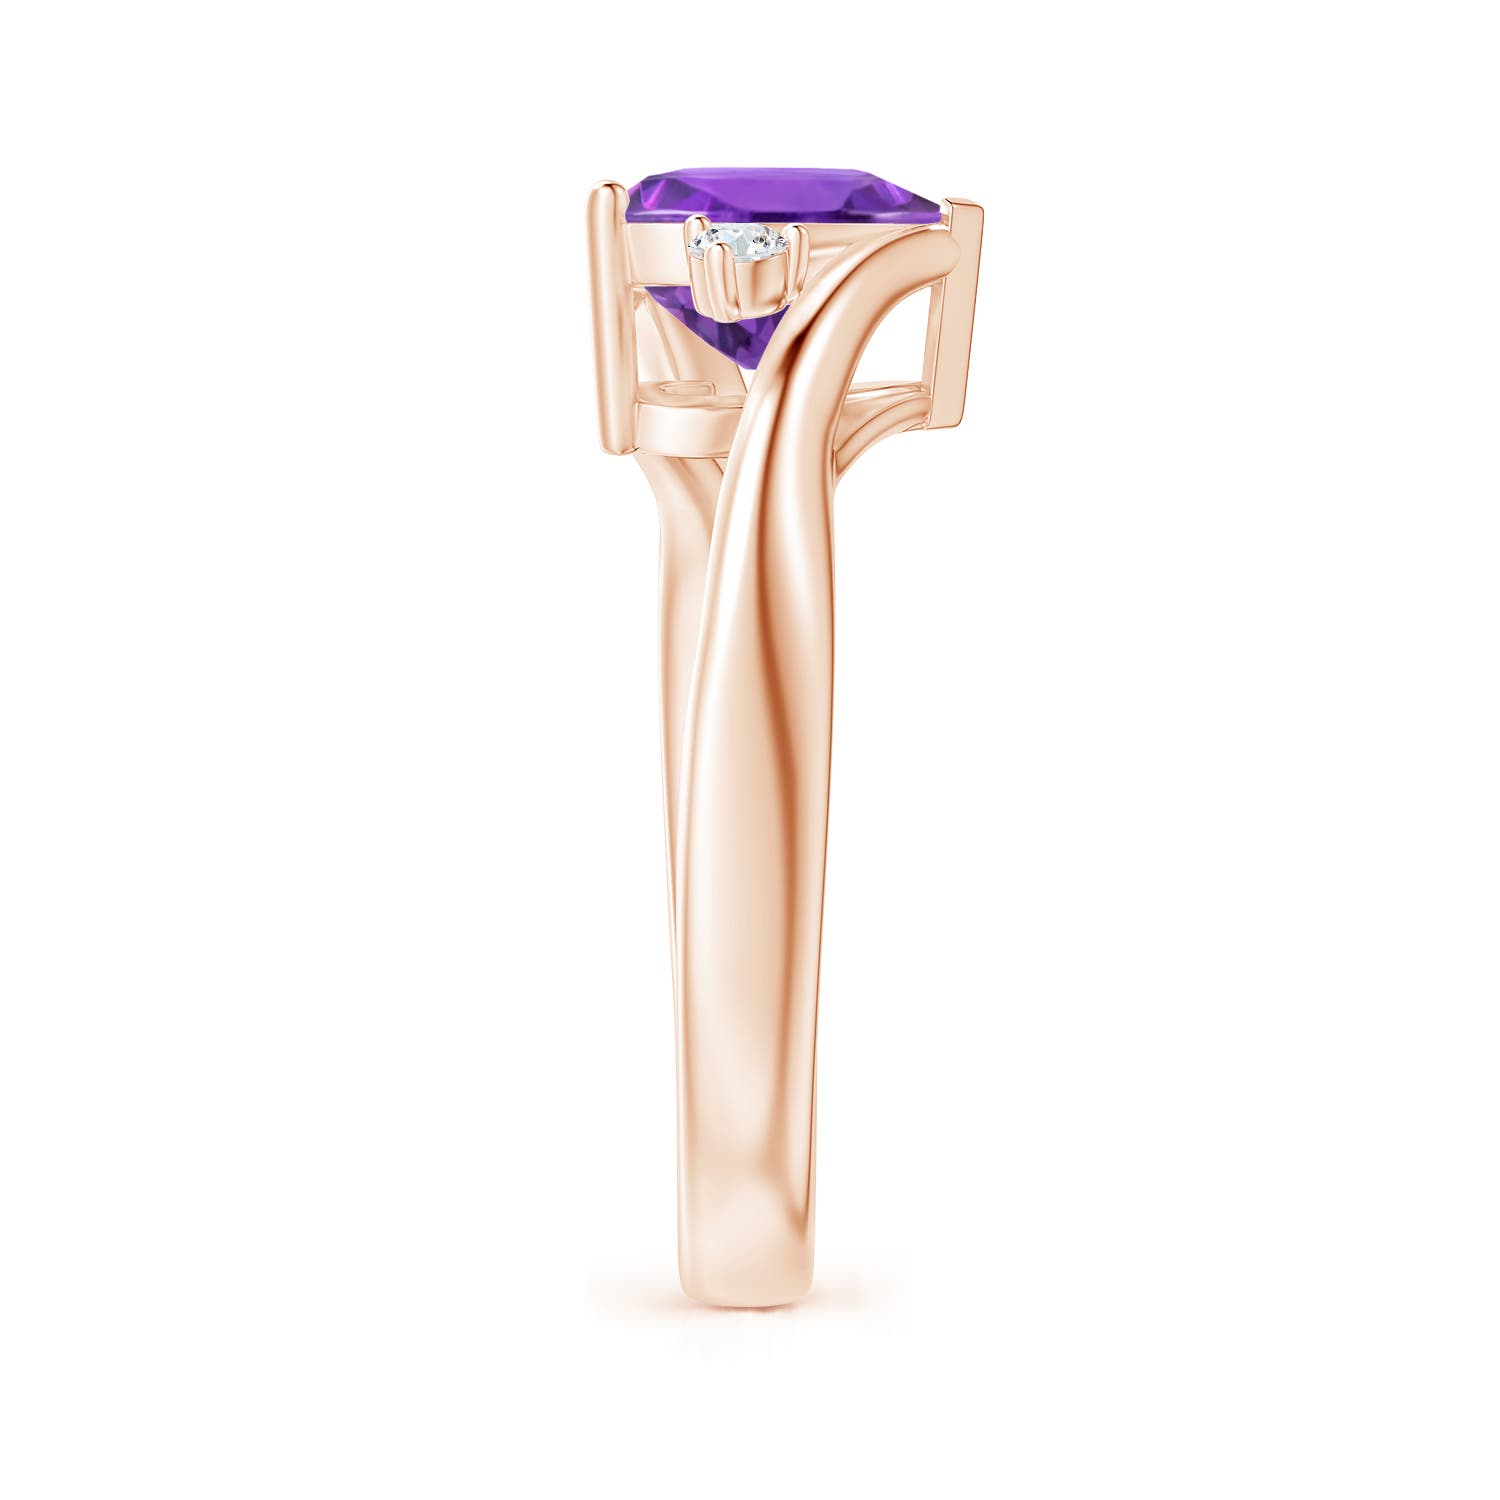 AAA - Amethyst / 1.59 CT / 14 KT Rose Gold